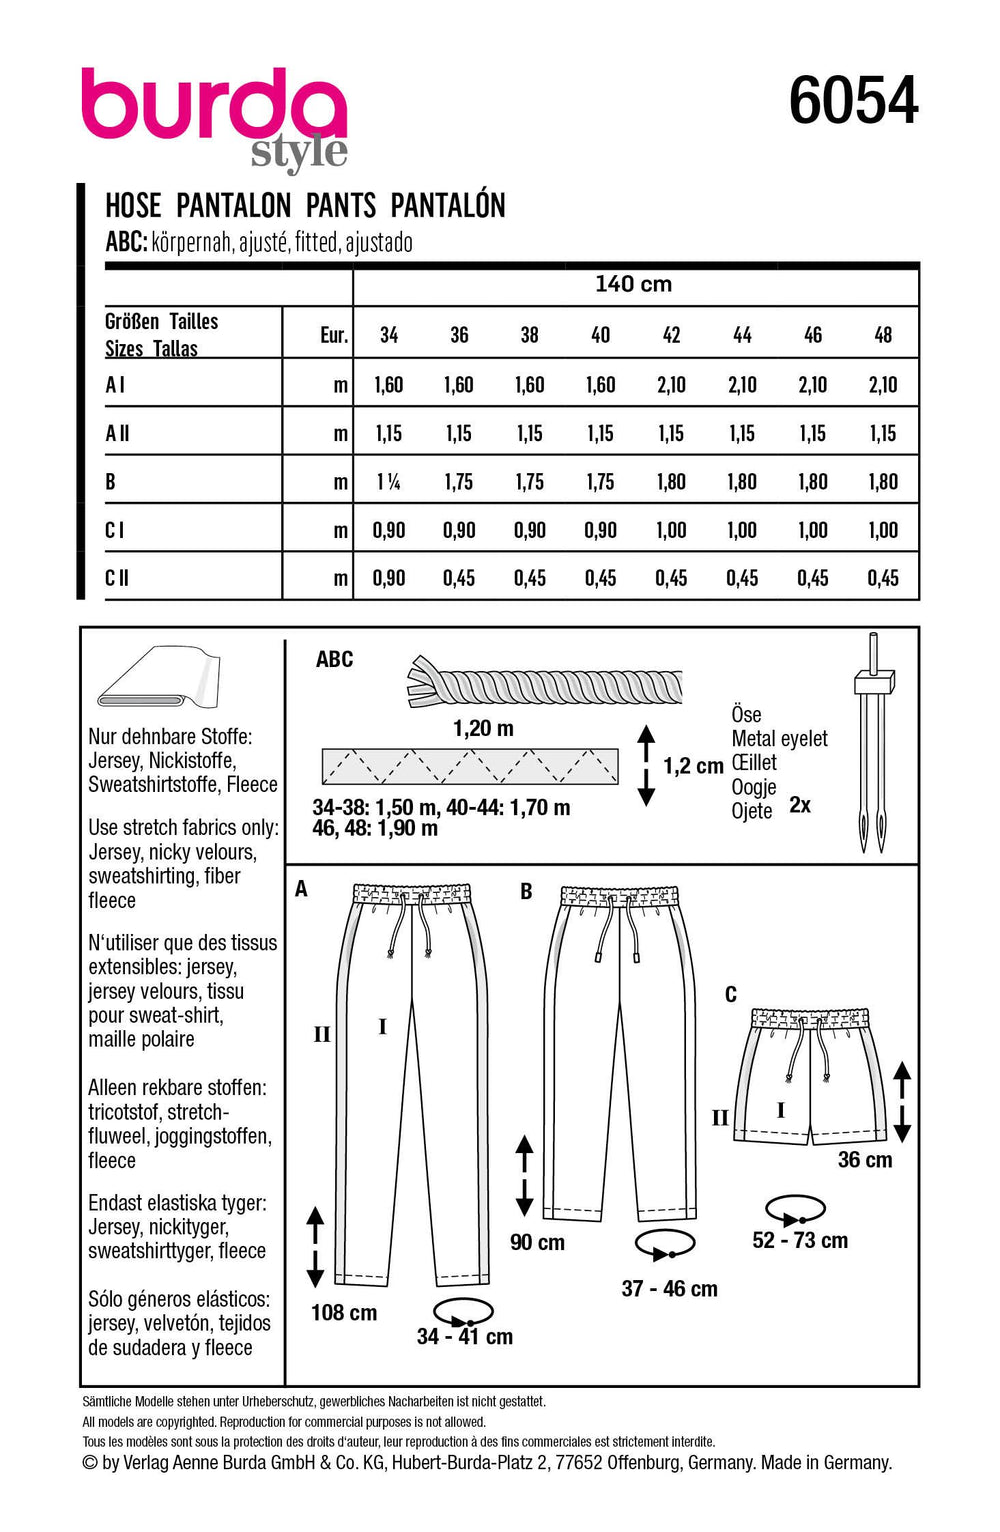 Burda Sewing Pattern 6054 Jogging Pants in Three Lengths from Jaycotts Sewing Supplies